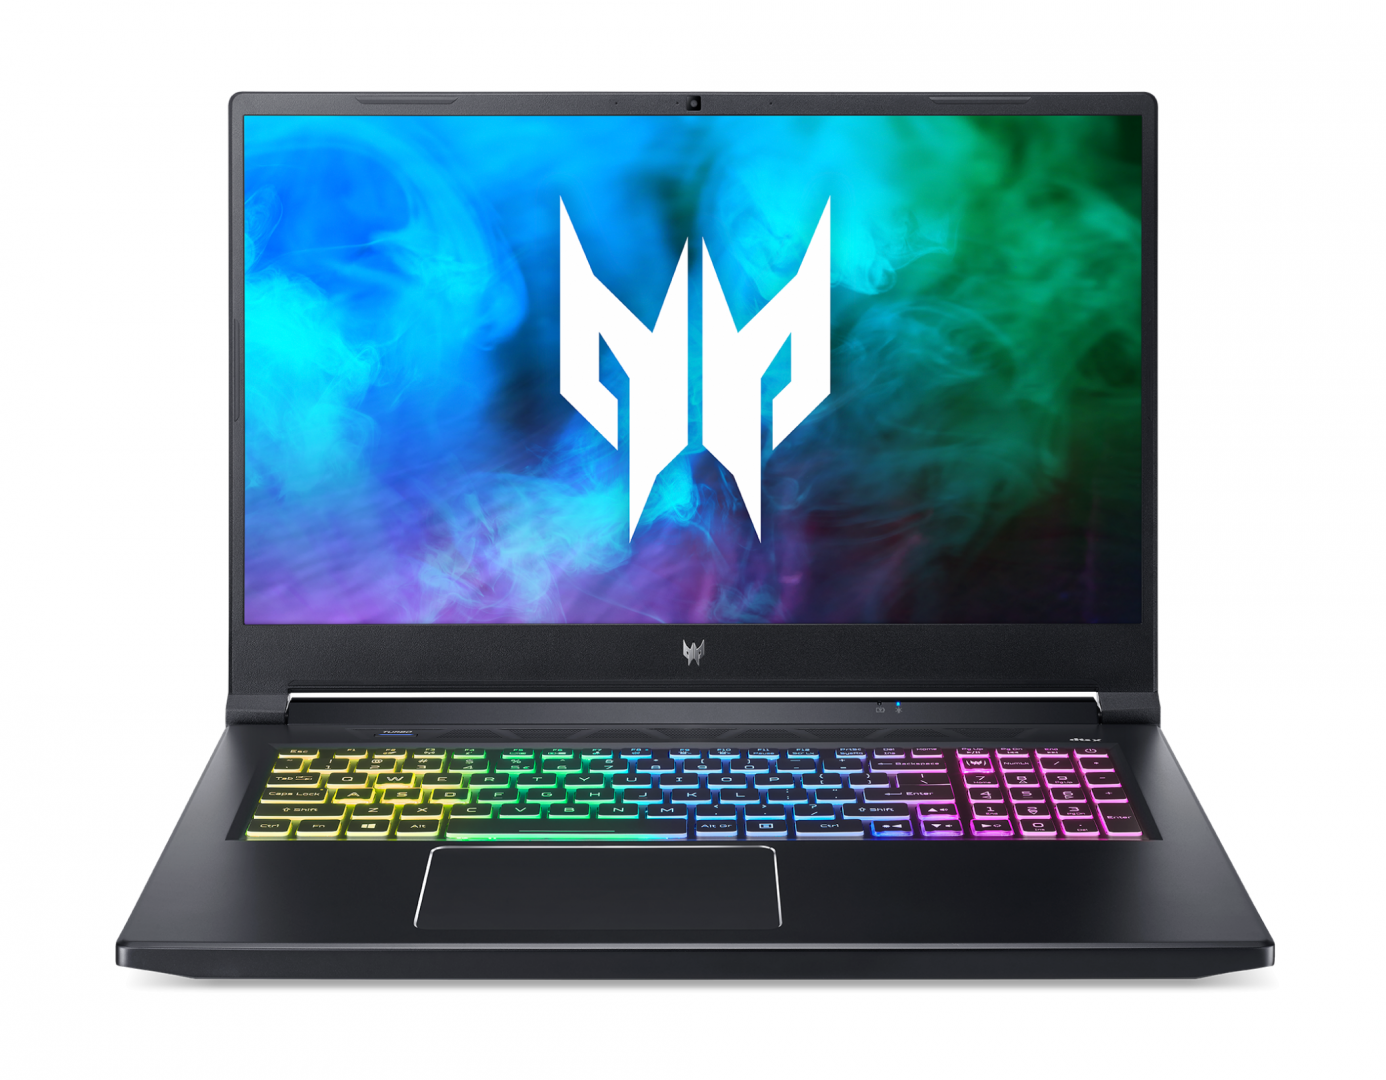 Laptop Acer Gaming Predator Helios 300 PH317-55, 17.3" display with IPS (In-Plane Switching) technology, Full HD 1920 x 1080, Acer ComfyView LED-backlit TFT LCD, 16:9 aspect ratio, supporting 144 Hz refresh rate, Wide viewing angle up to 170 degrees, Ultra-slim design, Mercury free, environment